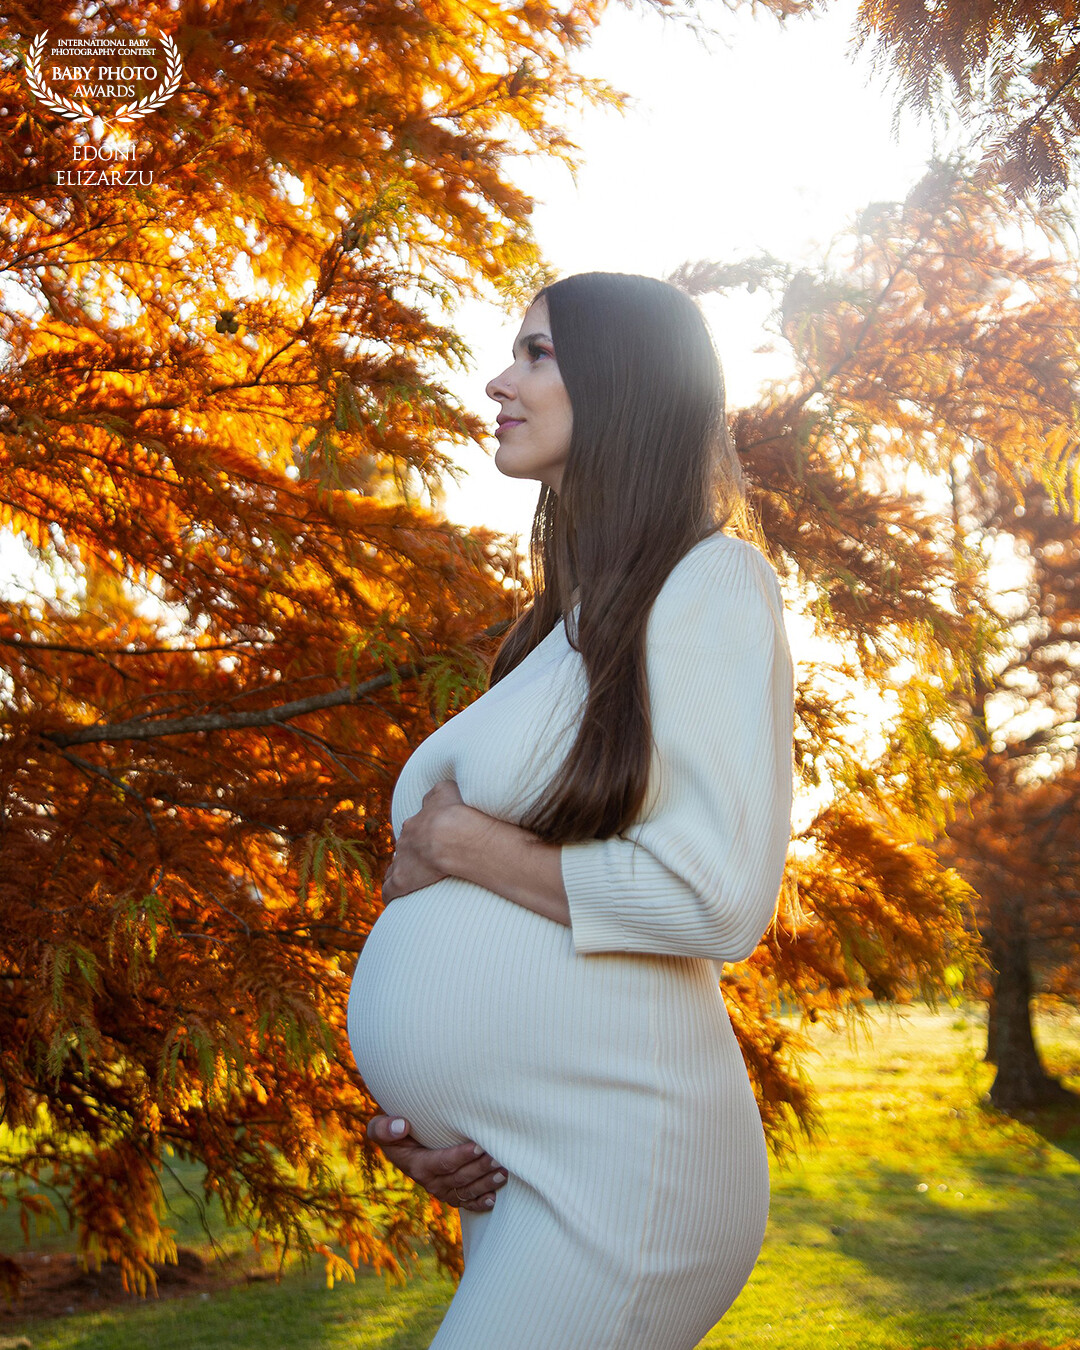 Love autumn! The best background for maternity/family photos! Mom to be, expecting her baby girl